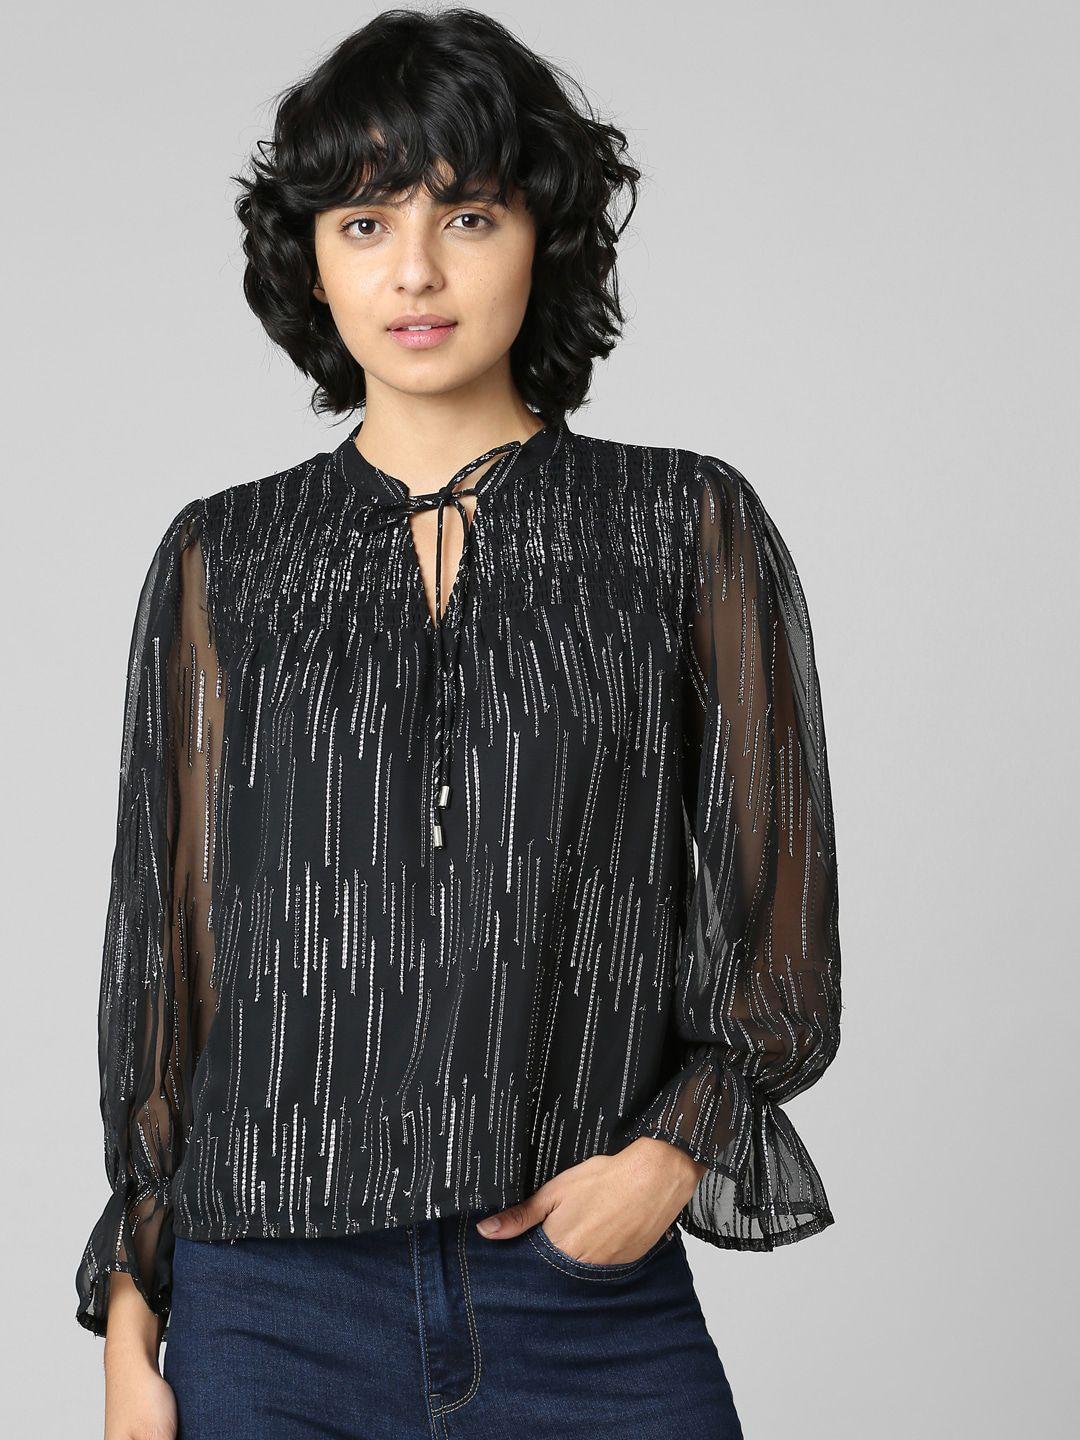 only-black-&-silver-geometric-printed-tie-up-neck-top